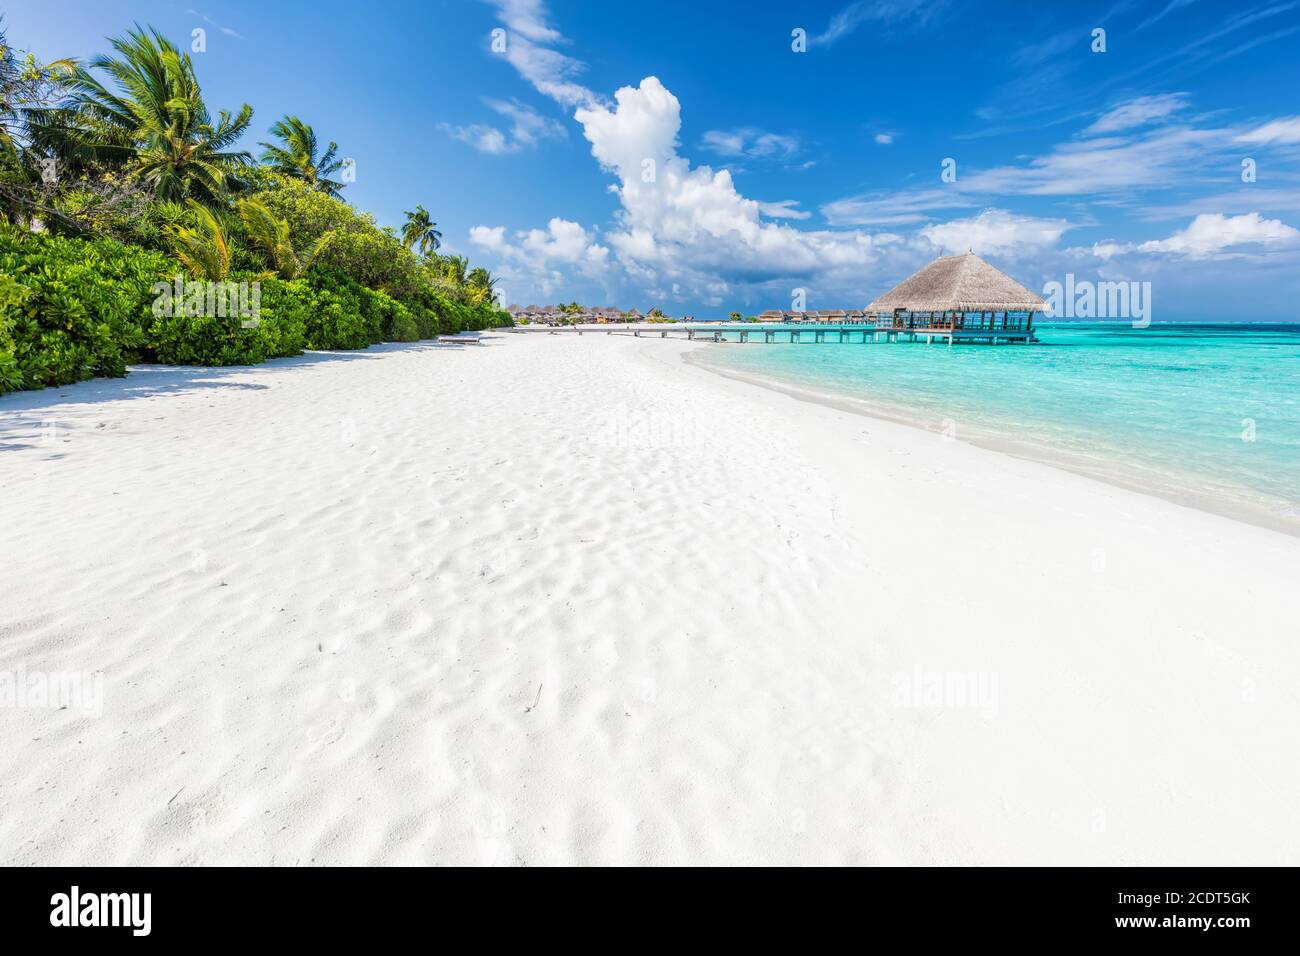 Wide sandy beach on a tropical island in Maldives. Palms and water lodge Stock Photo